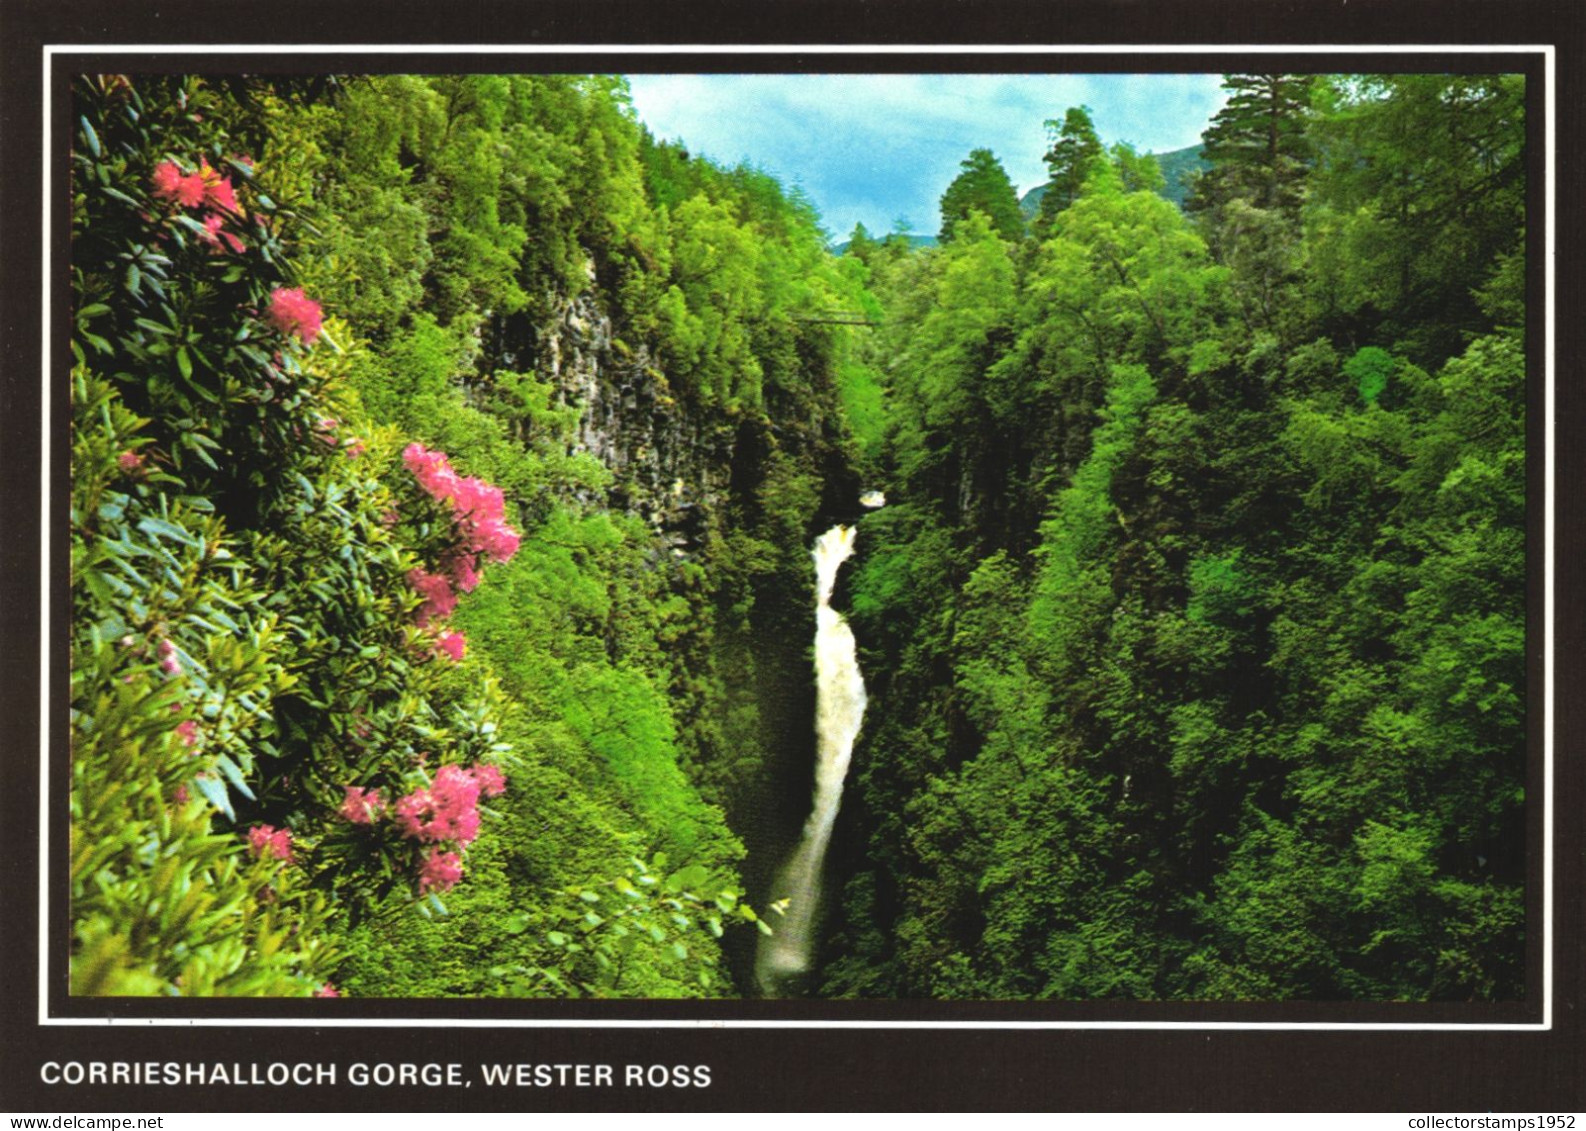 ROSS AND CROMARTY, CORRIESHALLOCH GORGE, WATERFALL, SCOTLAND, UNITED KINGDOM - Ross & Cromarty